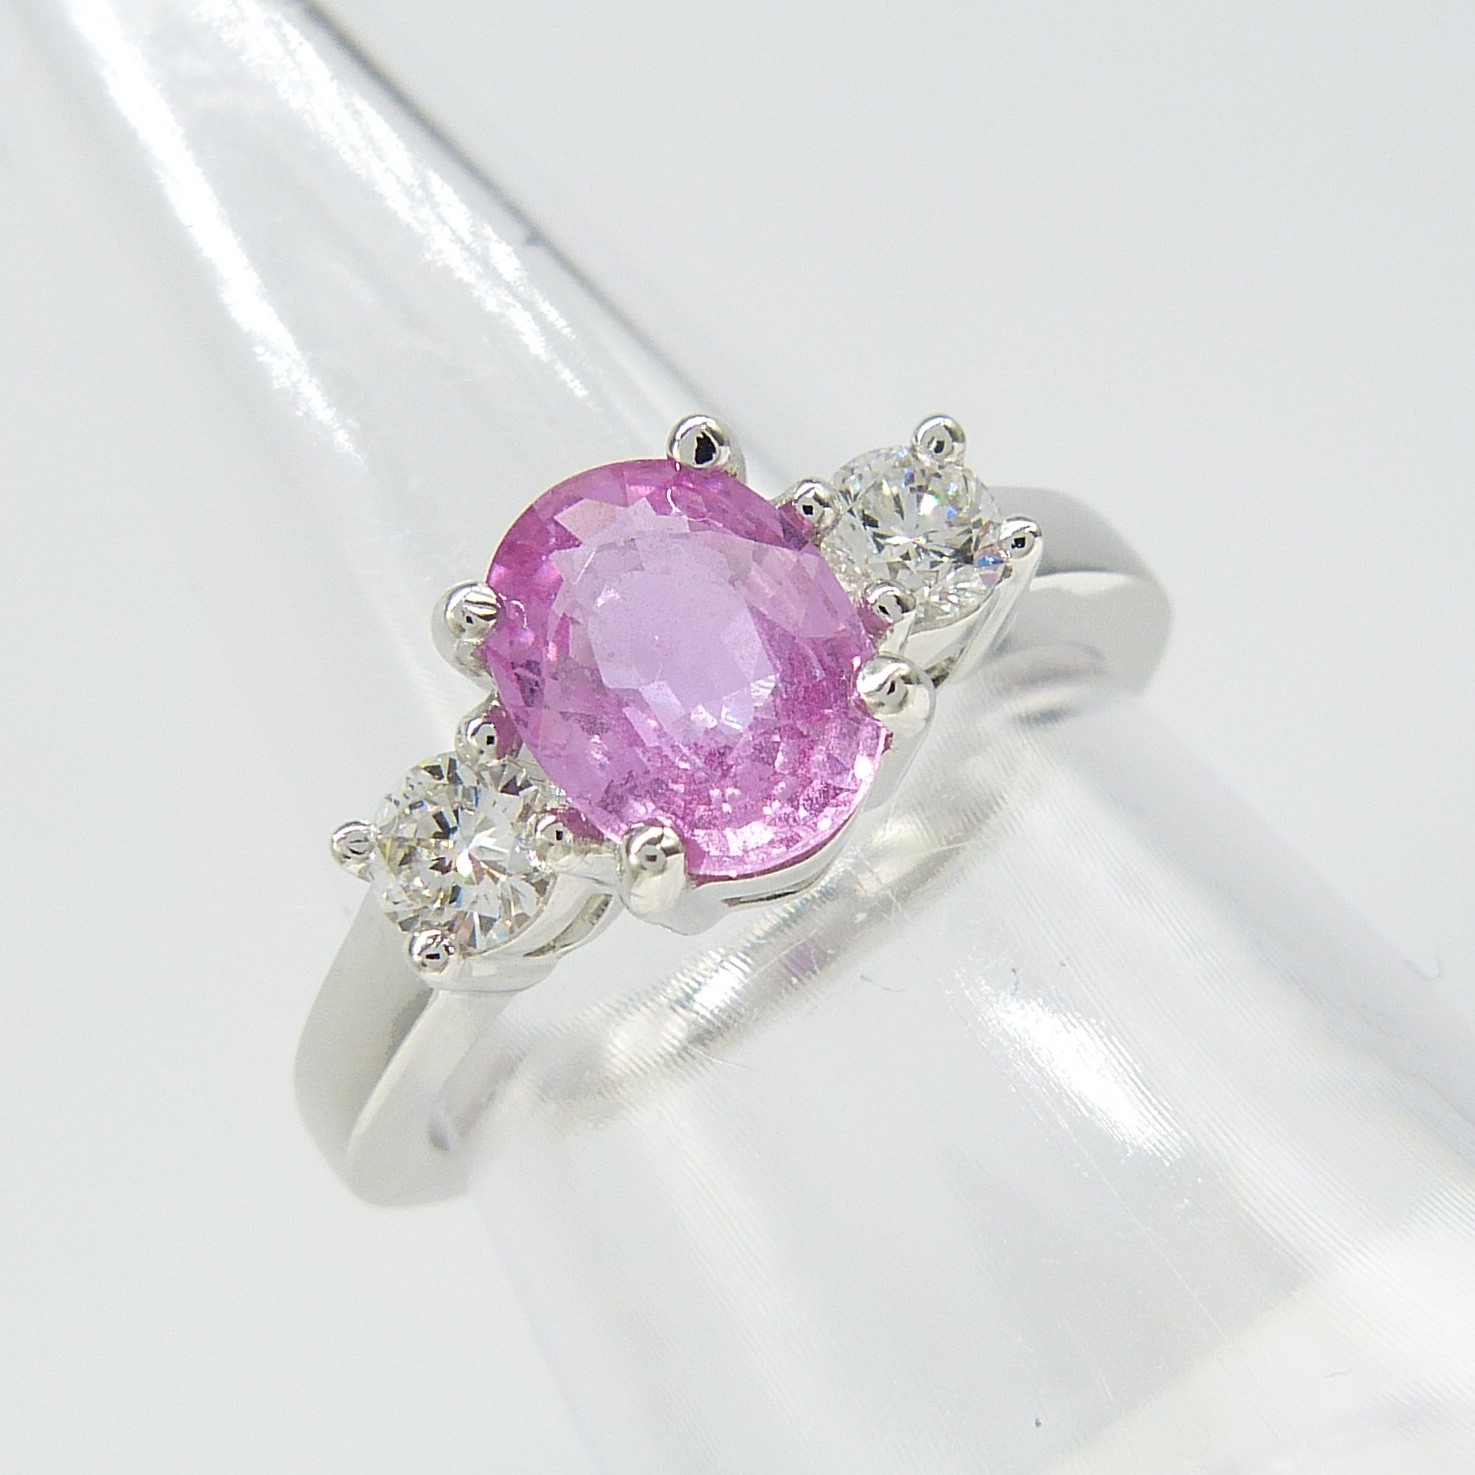 1.50 carat pink sapphire and 0.35 carat diamond 3-stone dress ring in 18ct white gold - Image 3 of 8